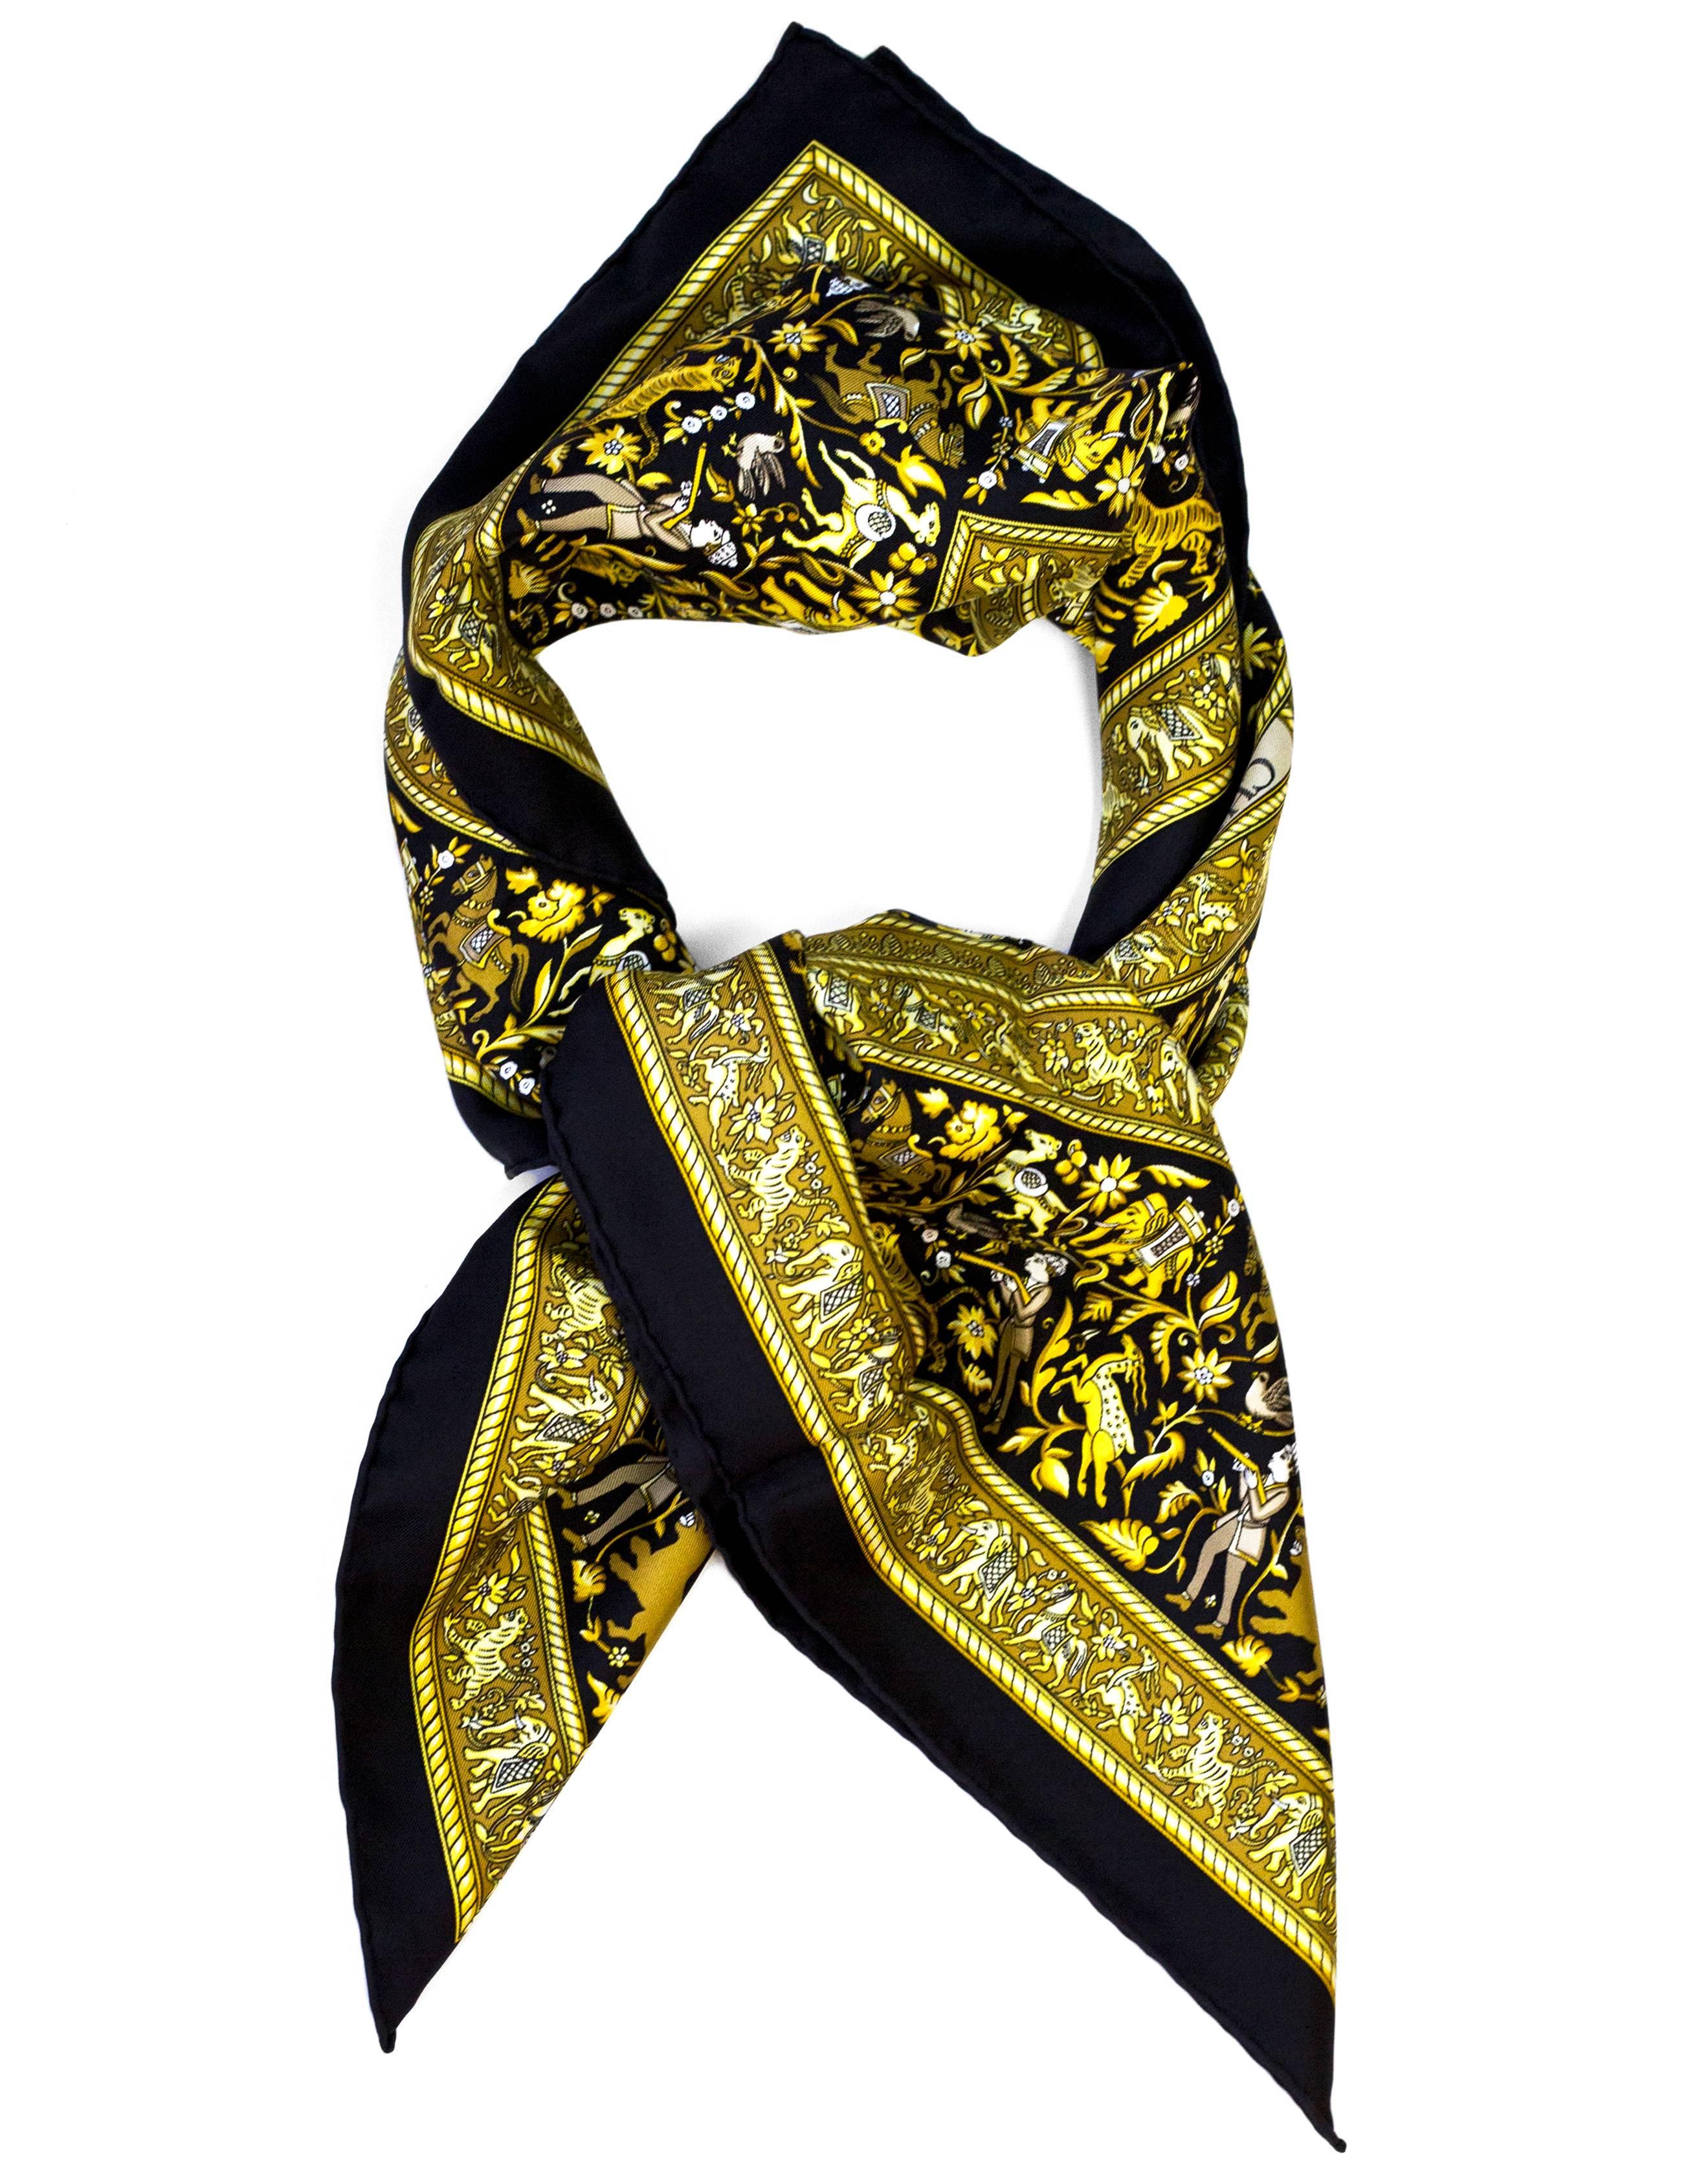 Hermes Black & Gold Chasse En Inde Silk 90cm Scarf NWT

Made In: France
Color: Black, gold
Composition: 100% Silk
Retail Price: $395 + tax
Overall Condition: Excellent pre-owned condition
Included: Hermes box, tag, ribbon

Measurements:
Length: